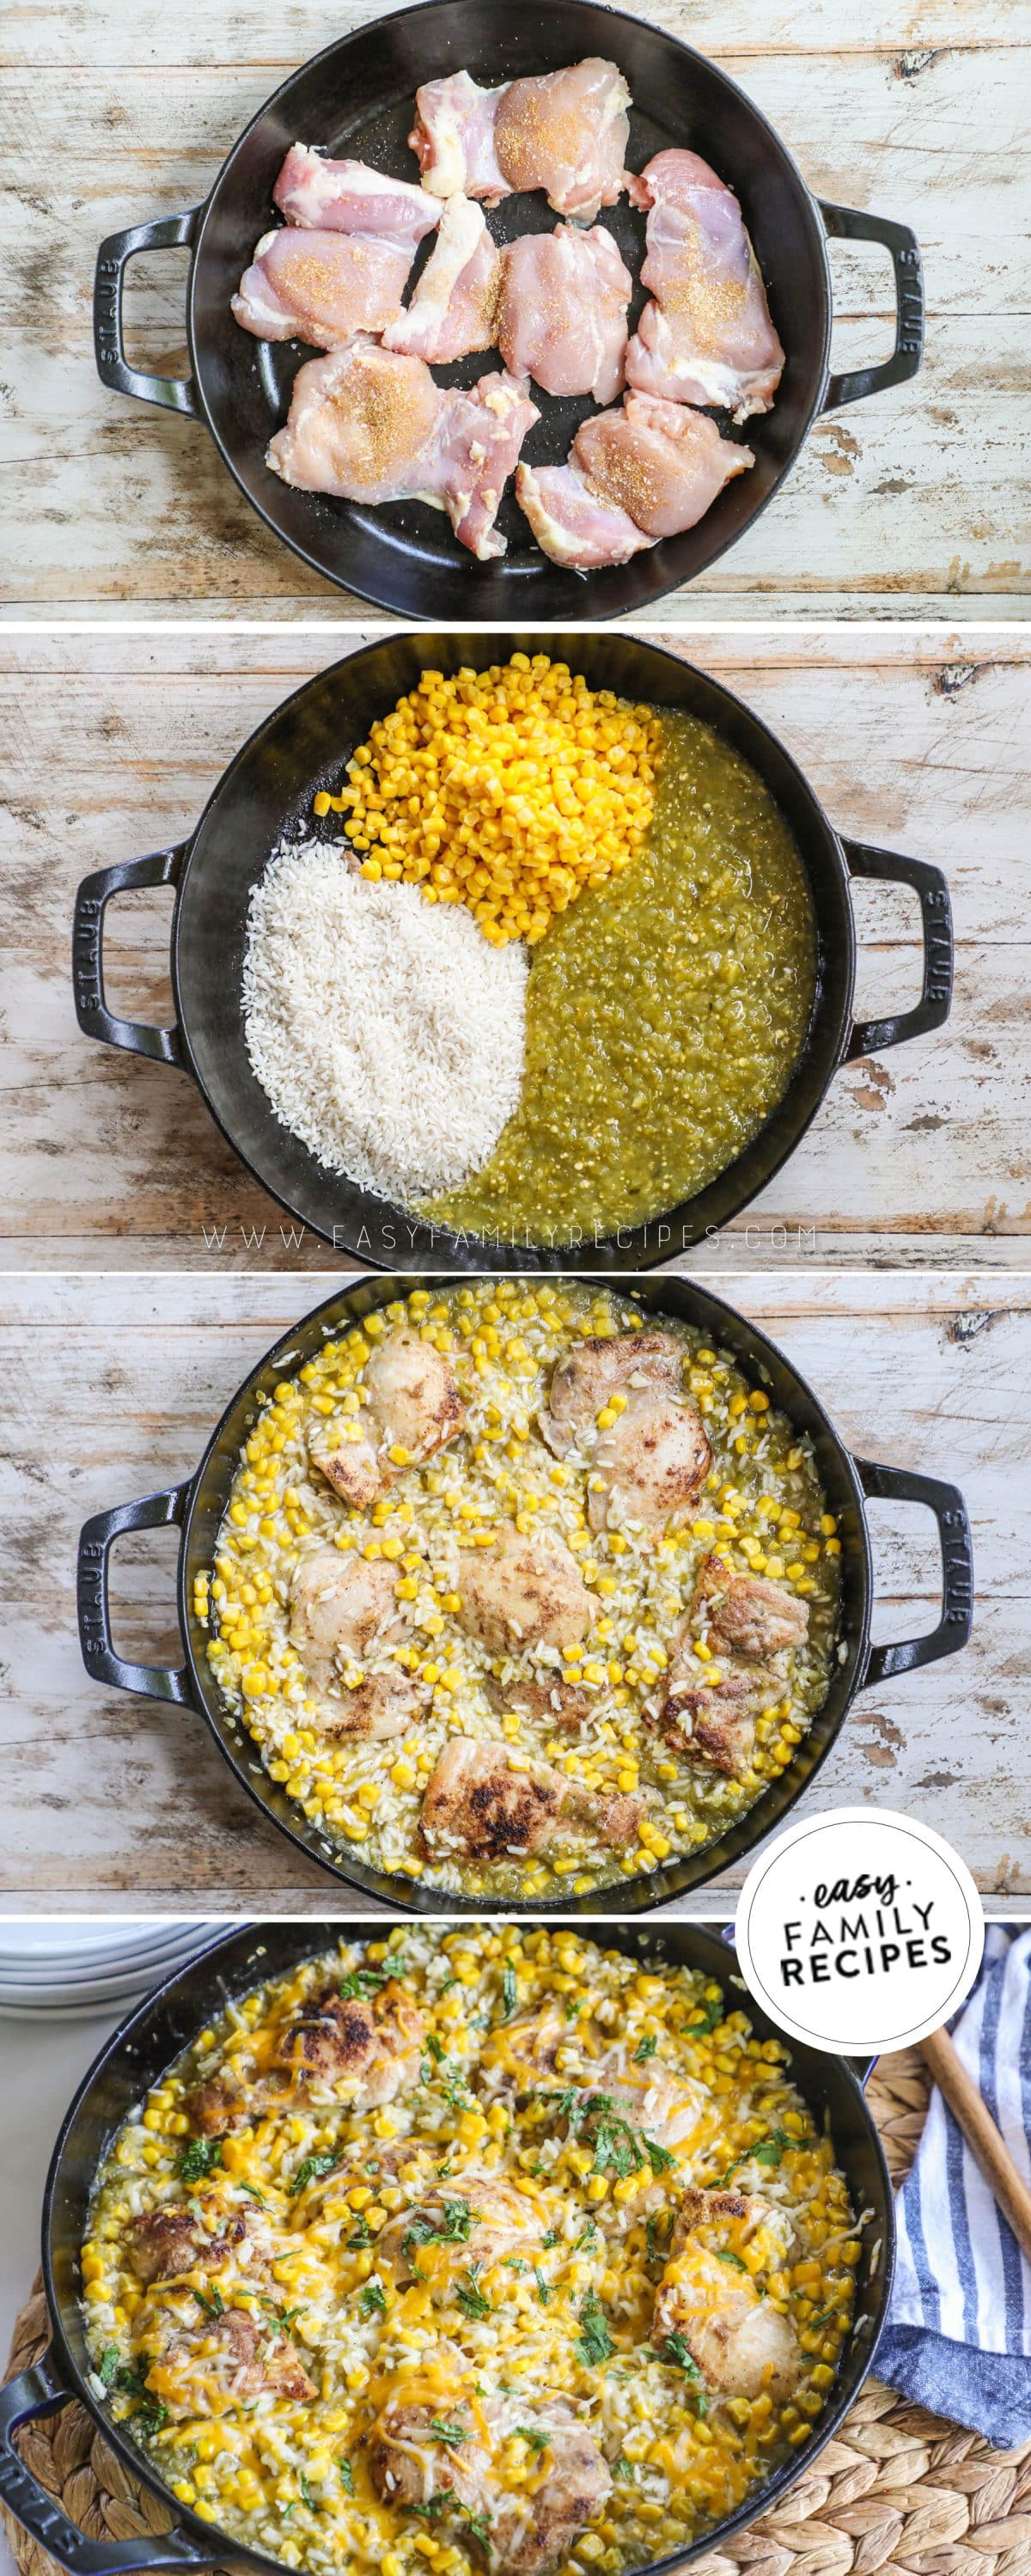 How to make salsa verde chicken and rice 1)sear chicken thighs in a skillet 2)deglaze and add corn, rice, and salsa 3)add chicken in 4)serve.